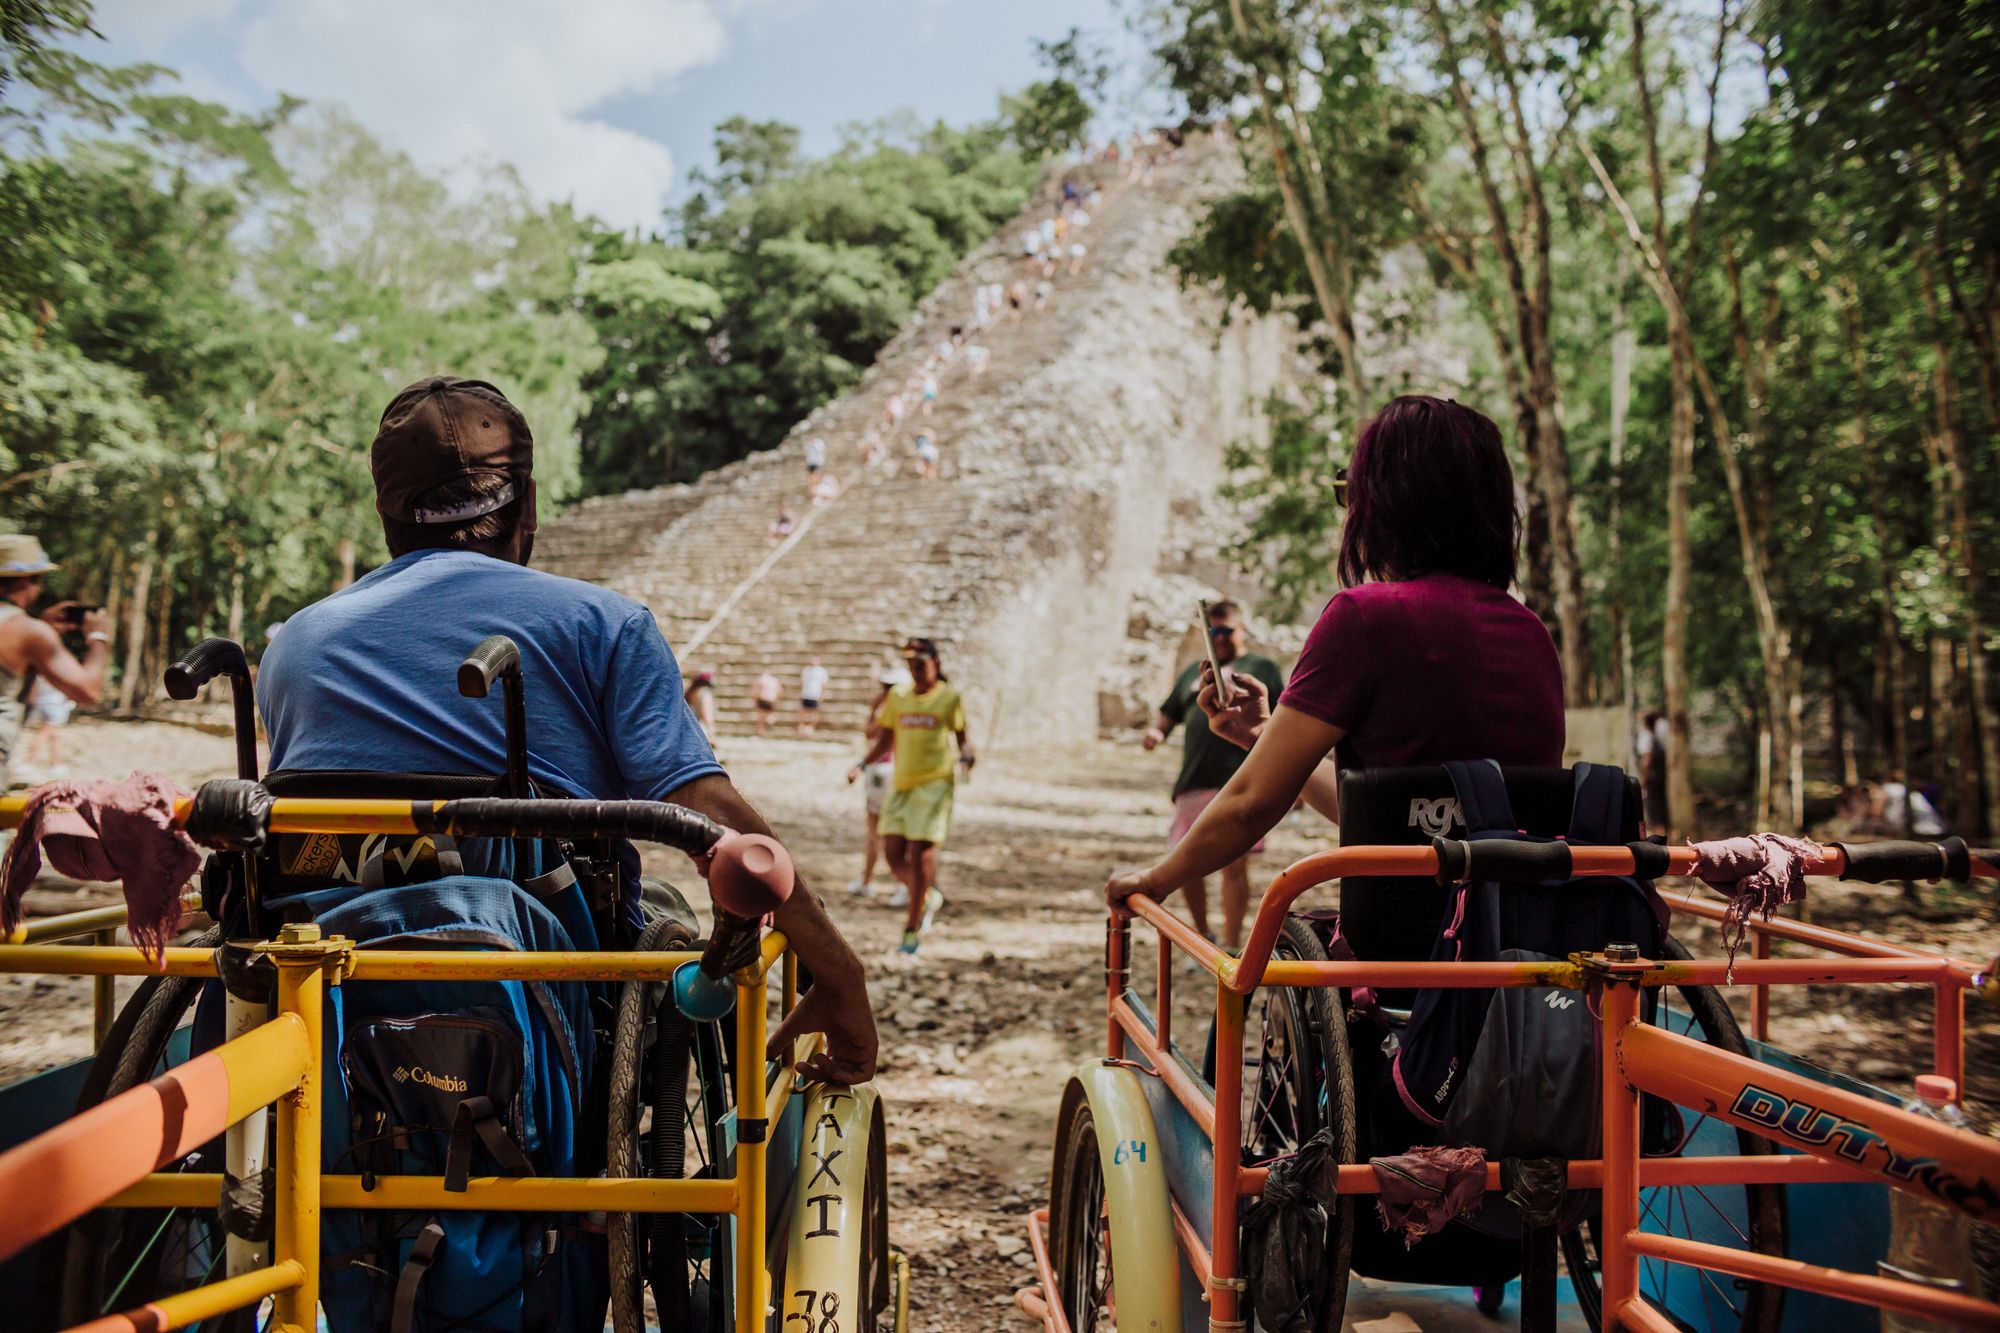 You can explore Mayan ruins near Cancun with a wheelchair